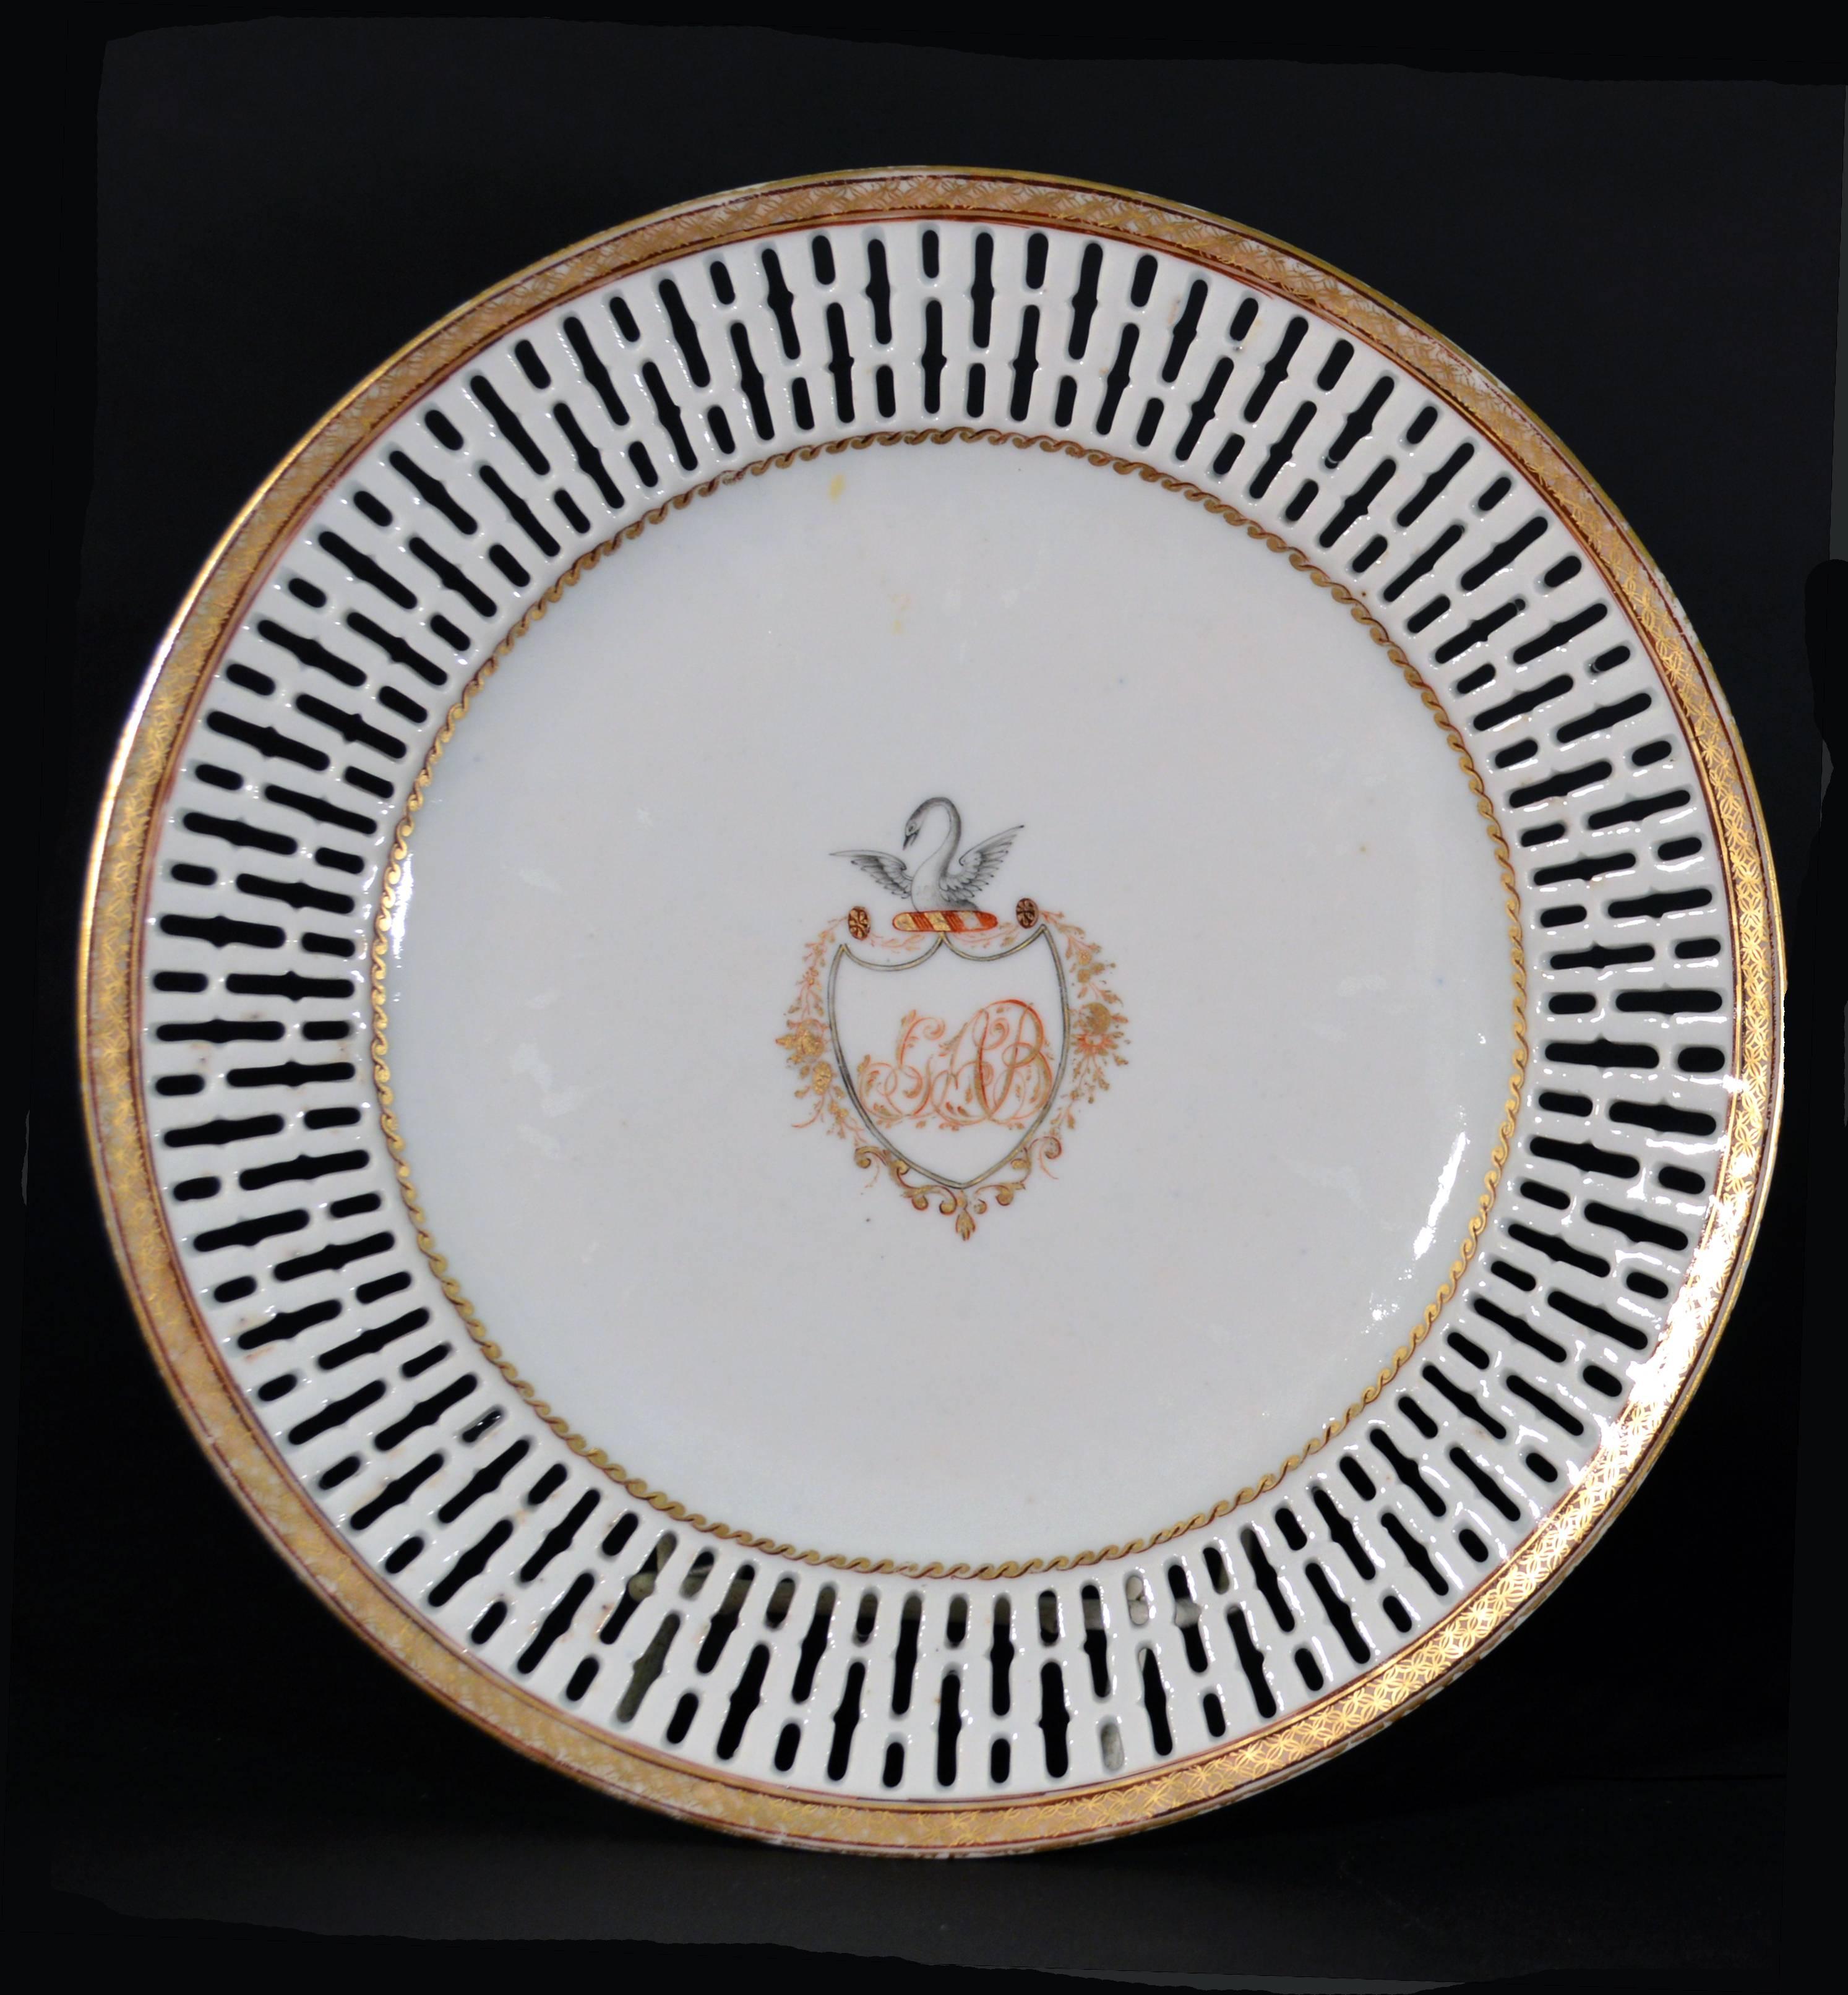 The plates are circular with an openwork inner border. The other rim decorated with tiny tight gilt flowerheads.  The outside of the central well decorated with a gilt and red ribbon.  

The center of the plate decorated above with a crest of a